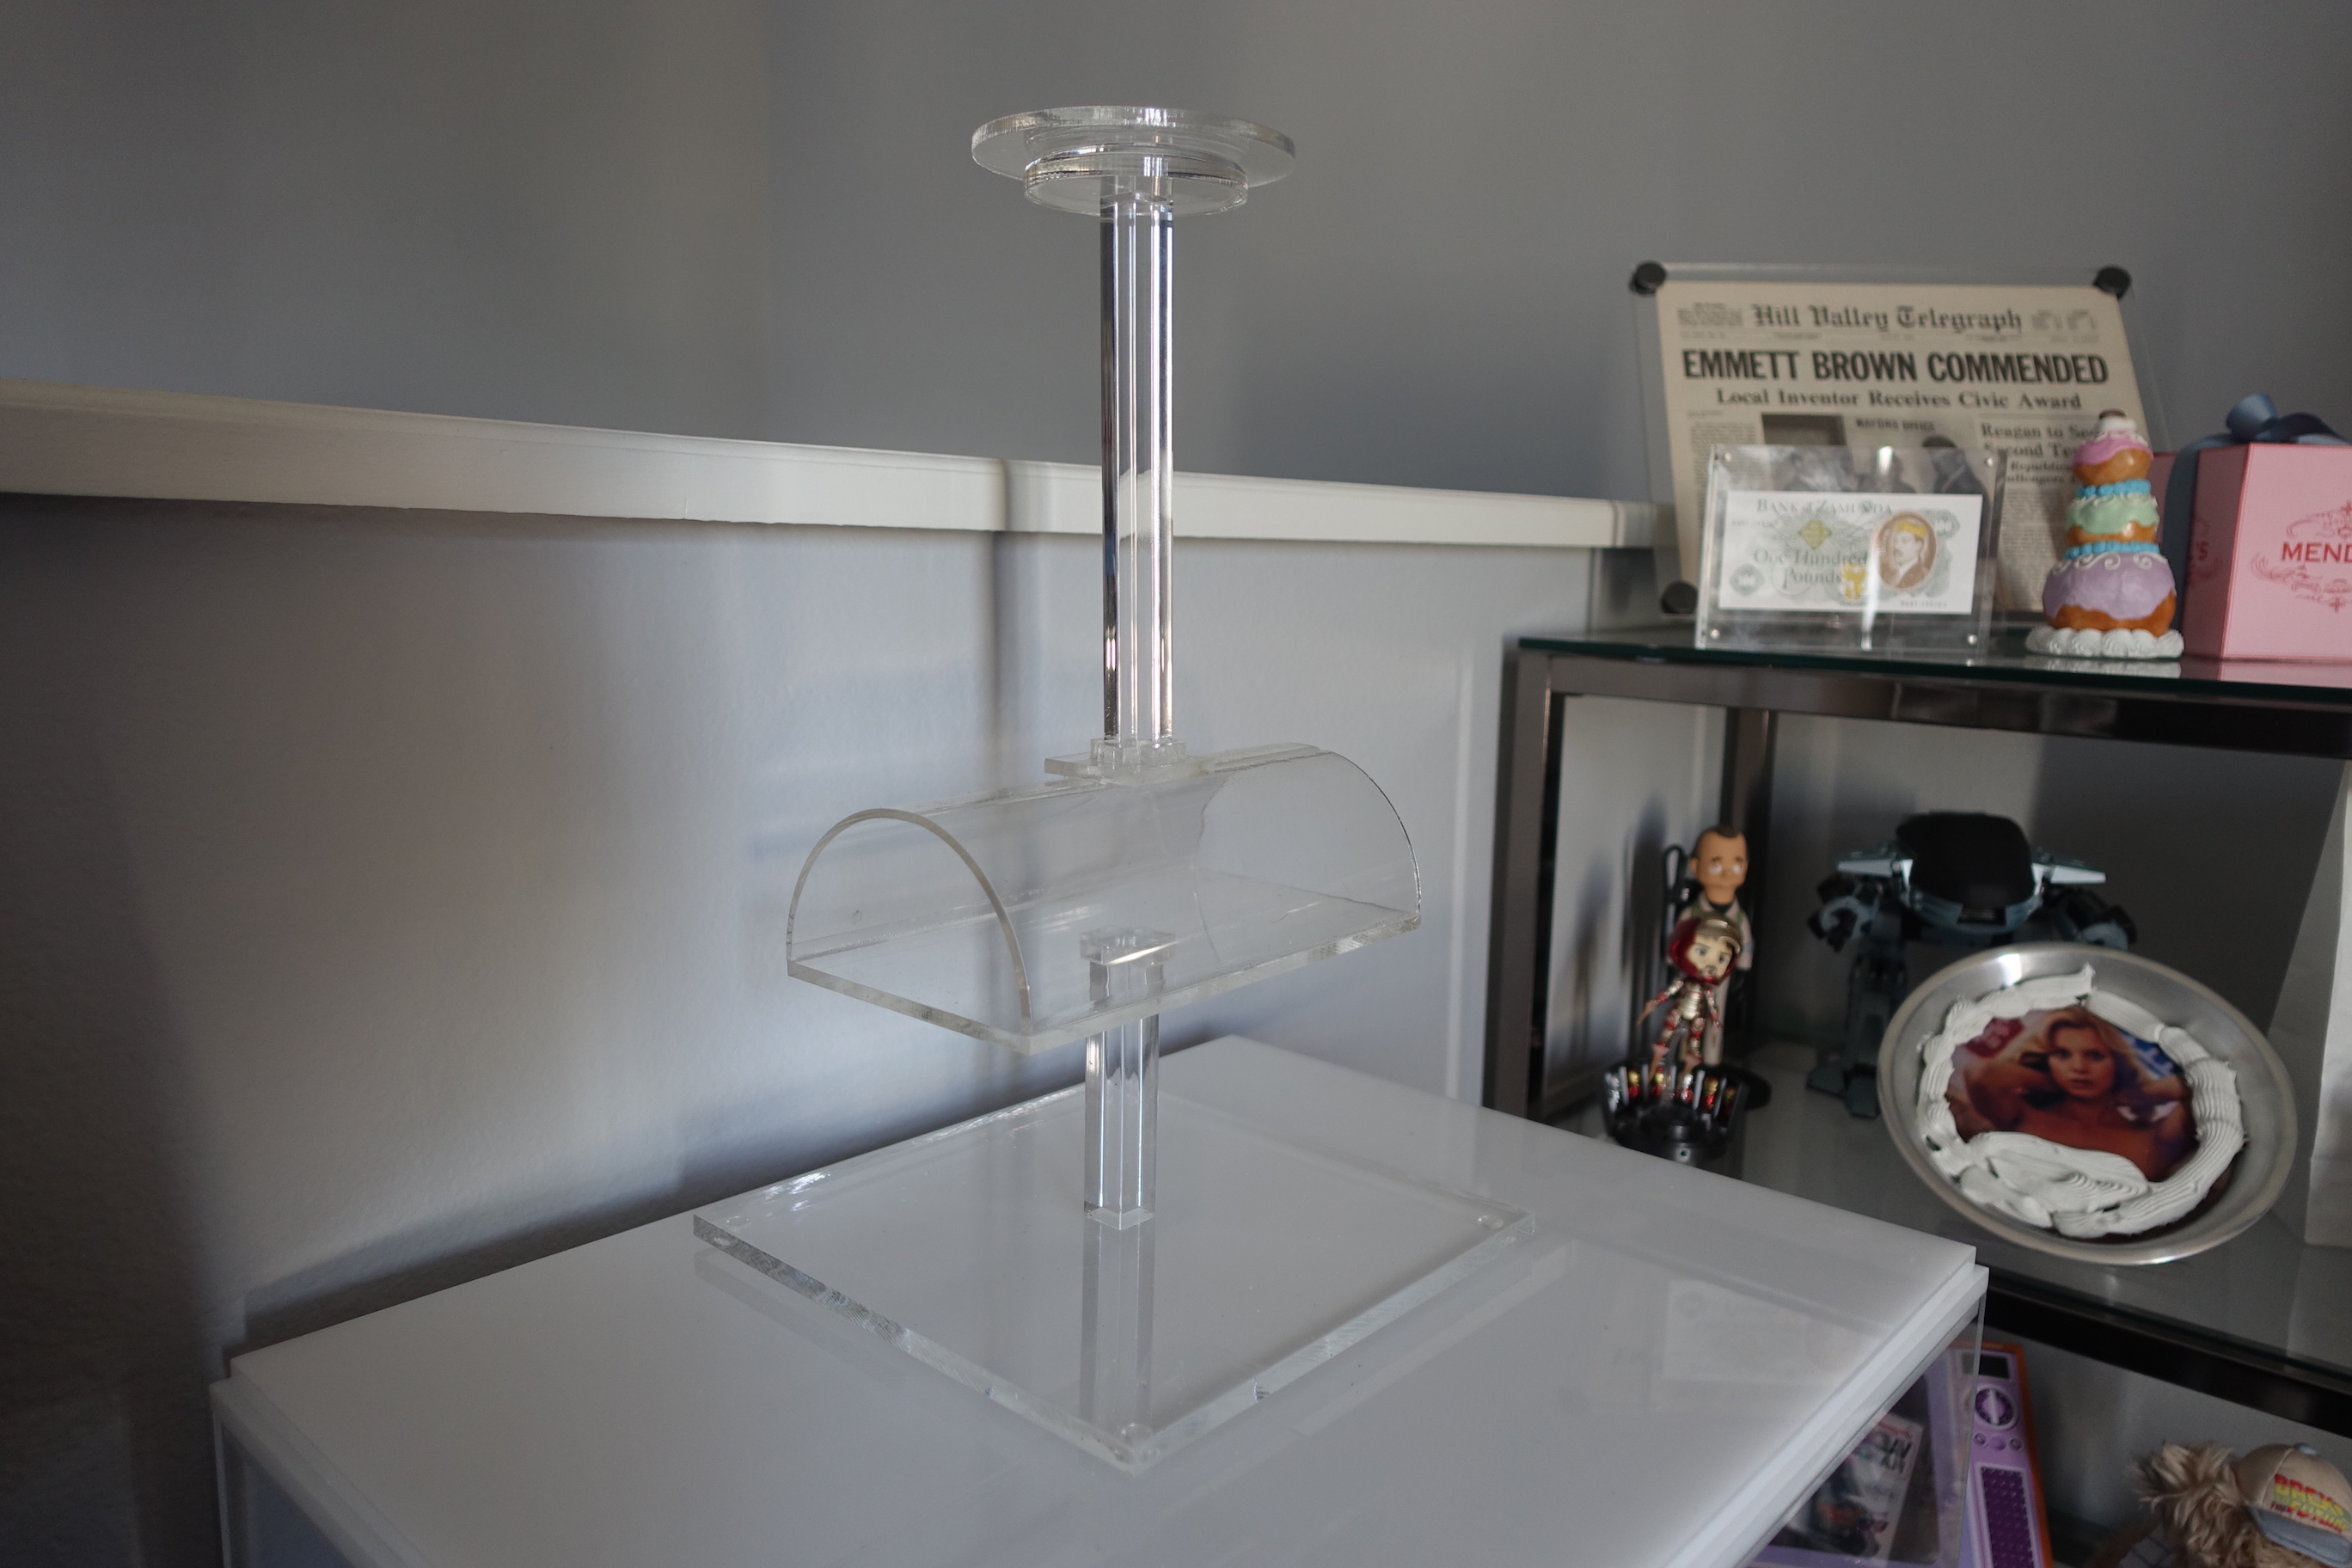 Hat Stand with Acrylic Riser - Tom Spina Designs » Tom Spina Designs